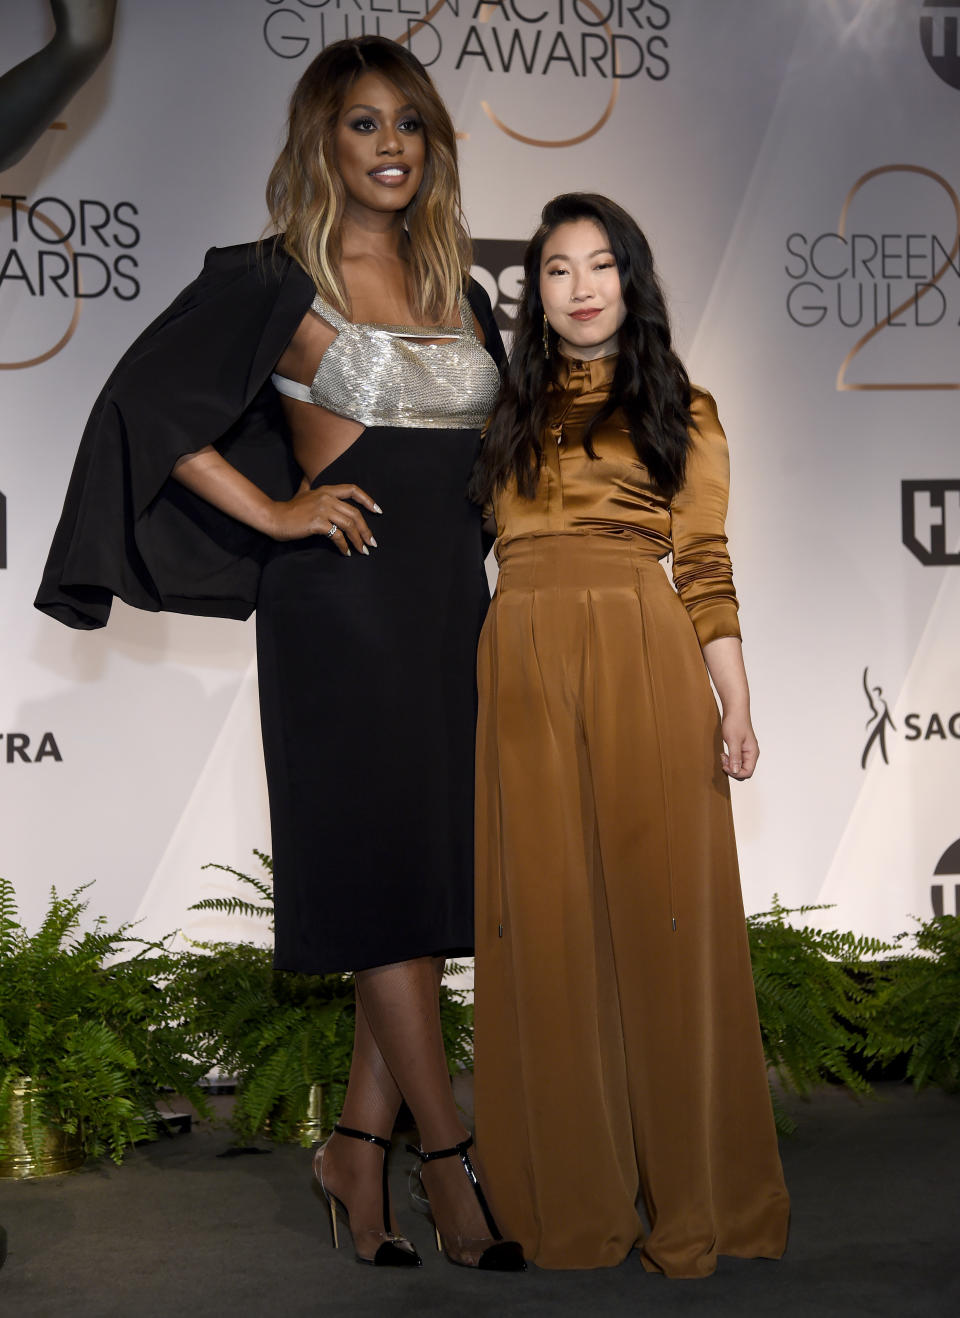 Laverne Cox, left, and Awkwafina pose following the nominations announcement for the 25th annual Screen Actors Guild Awards at the Pacific Design Center on Wednesday, Dec. 12, 2018, in West Hollywood, Calif. The show will be held on Sunday, Jan. 27, 2019, in Los Angeles. (Photo by Chris Pizzello/Invision/AP)